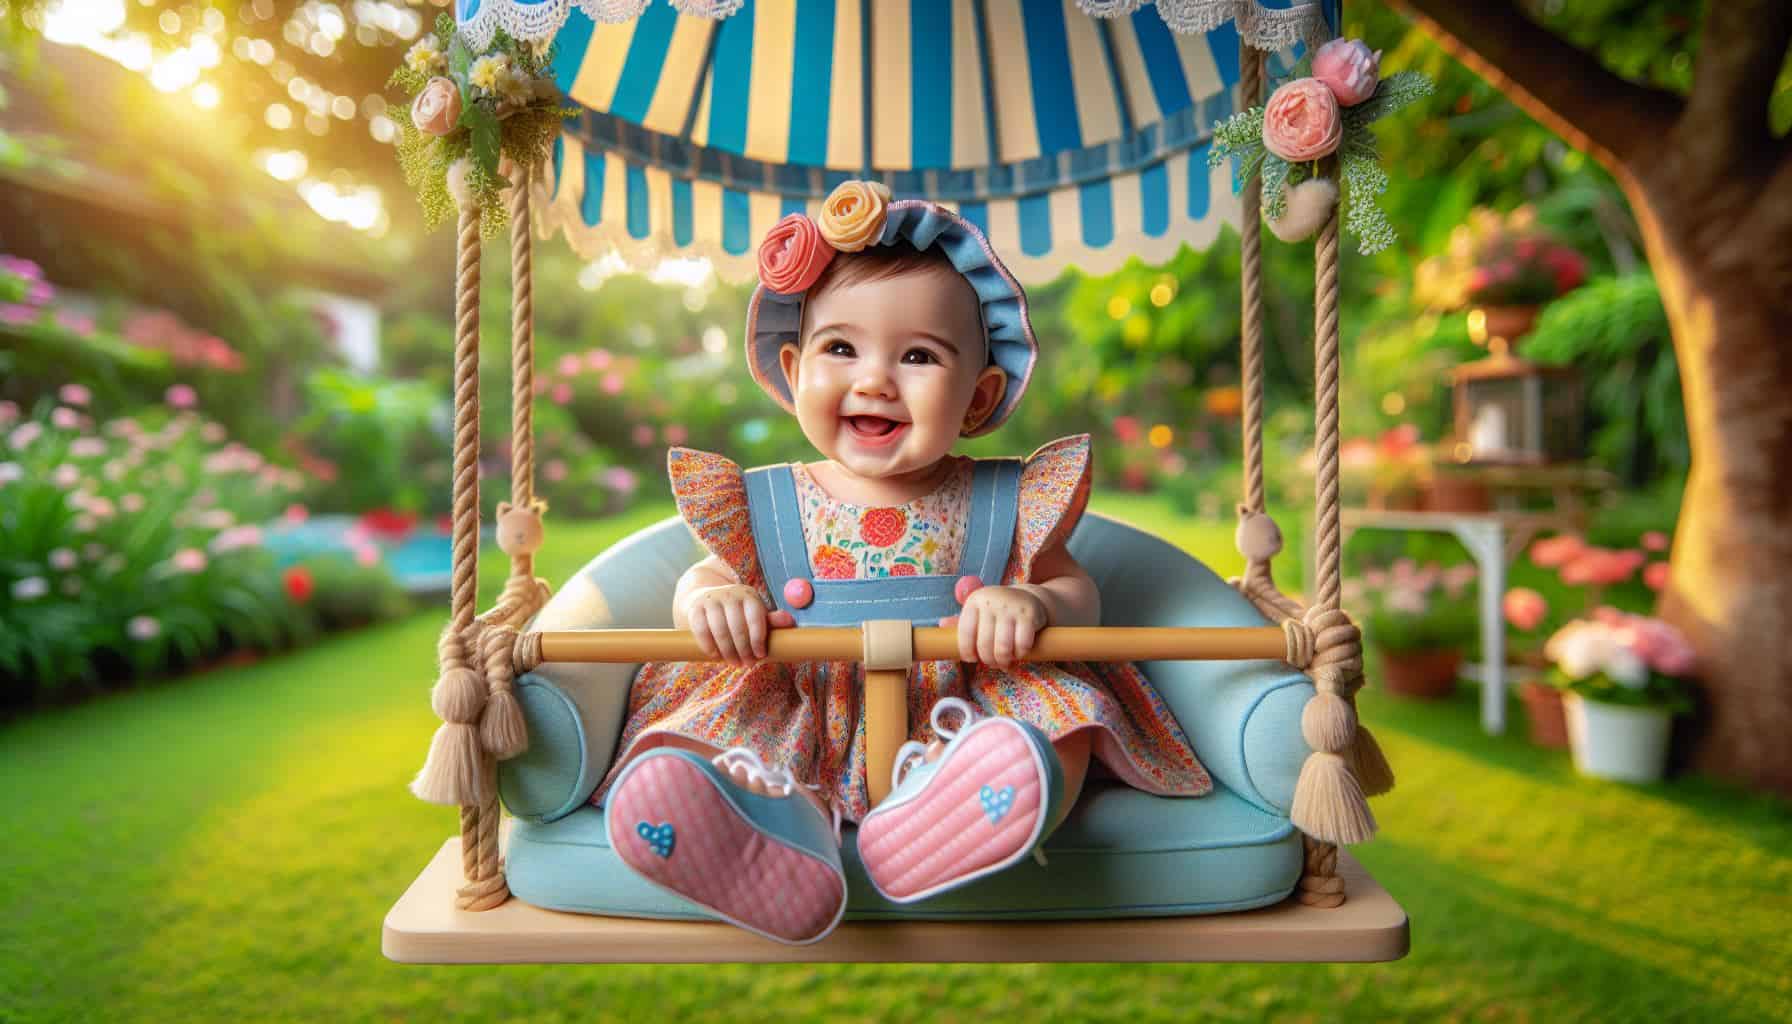 Baby swinging in a swing outdoors